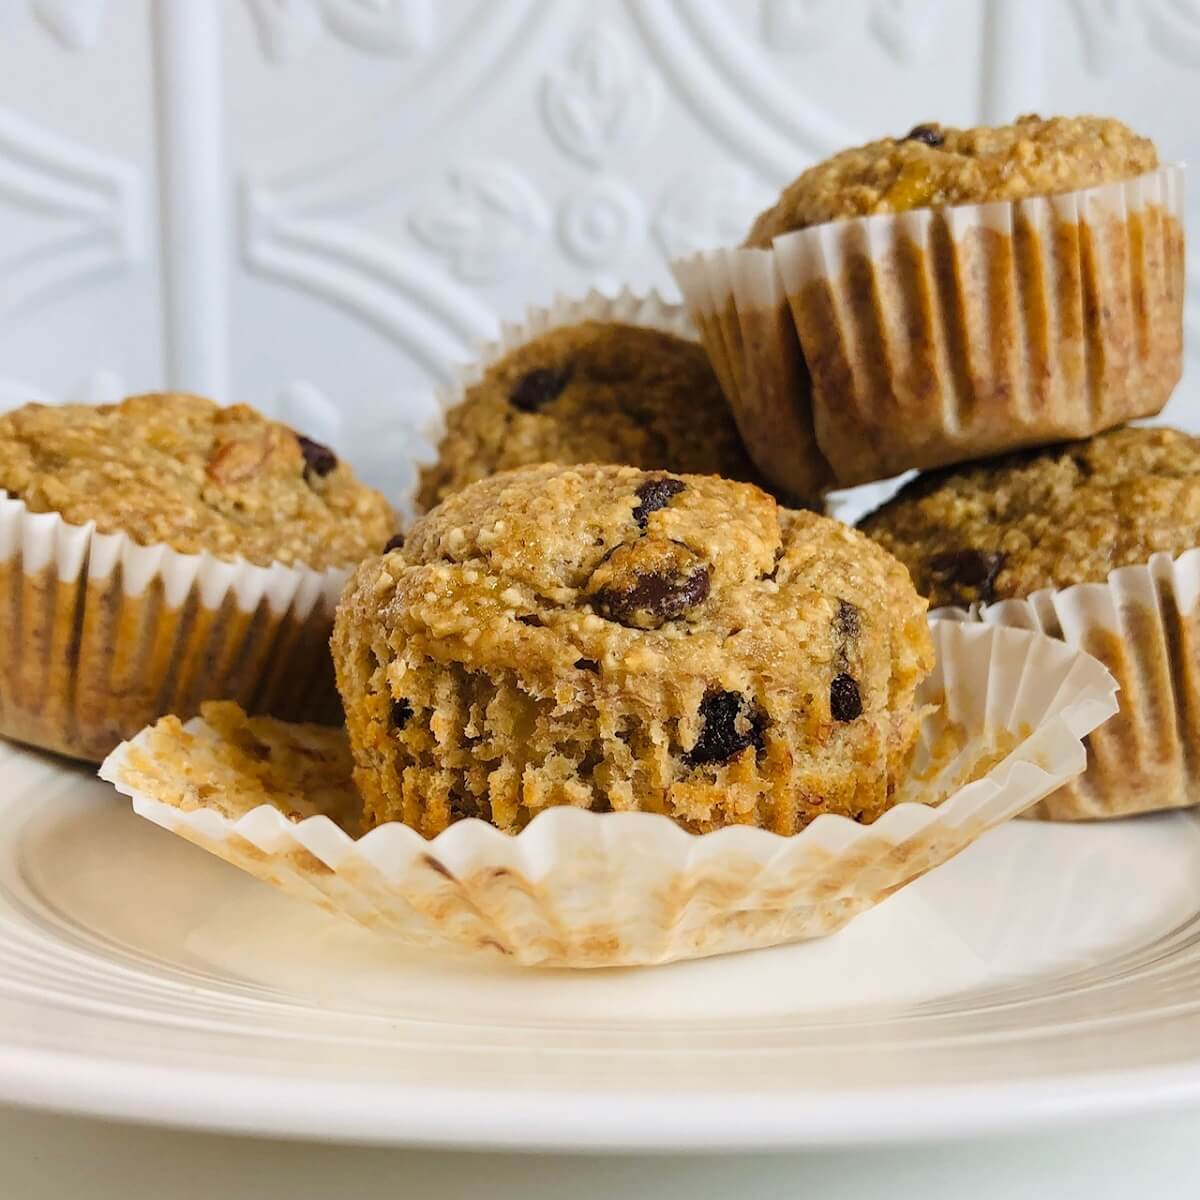 Five oatmeal banana chocolate chip muffins on a white plate against a tile back splash.